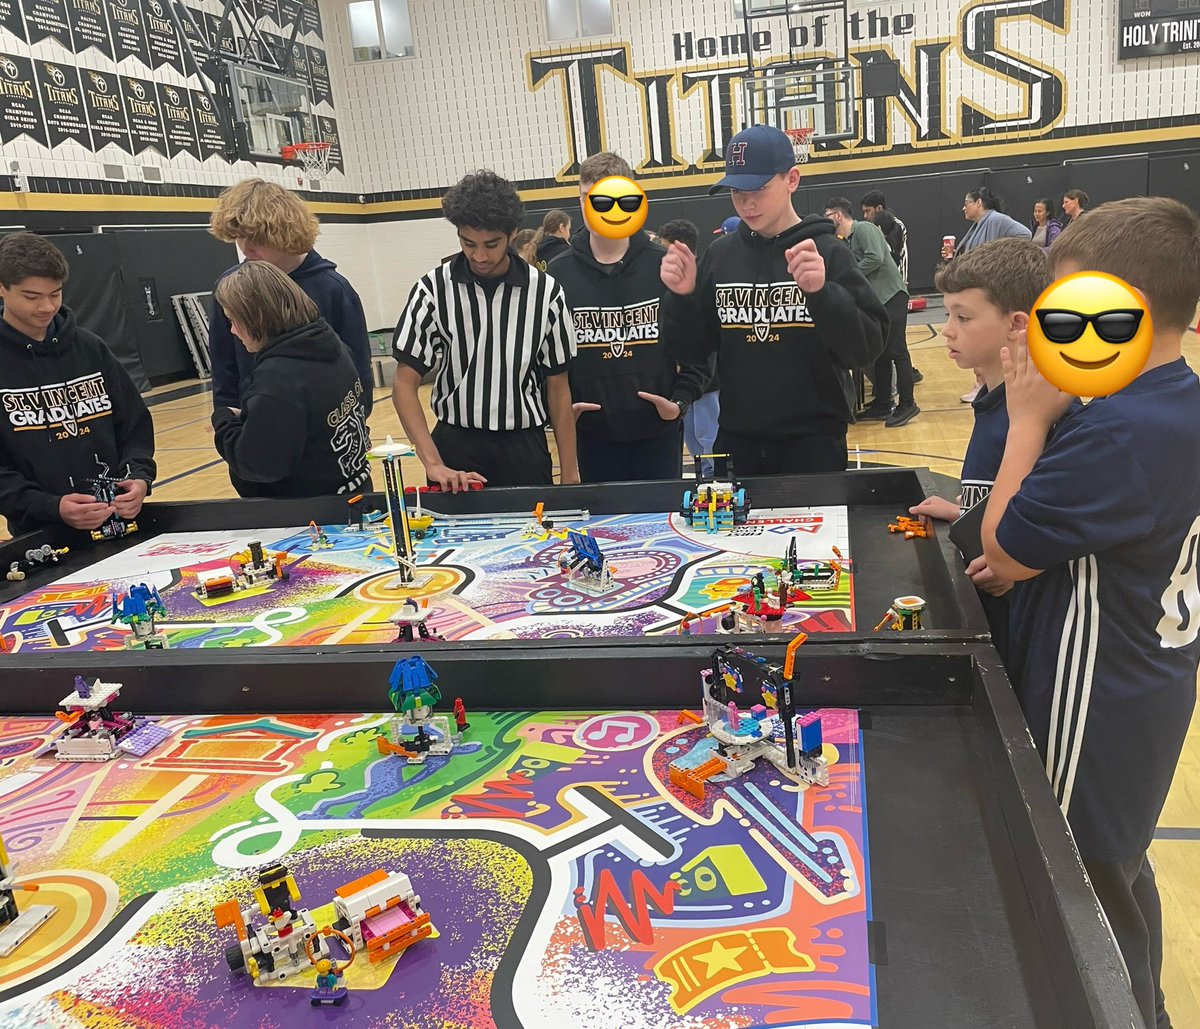 Congratulations to our Vikings LEGO Robotics team who won 3rd place in yesterday’s competition at @HolyTrinityOak! We are so proud of you for your innovation, dedication and persistence! Thank you @hcdsbsteam for hosting! @MrsDLourenco @curlykim2